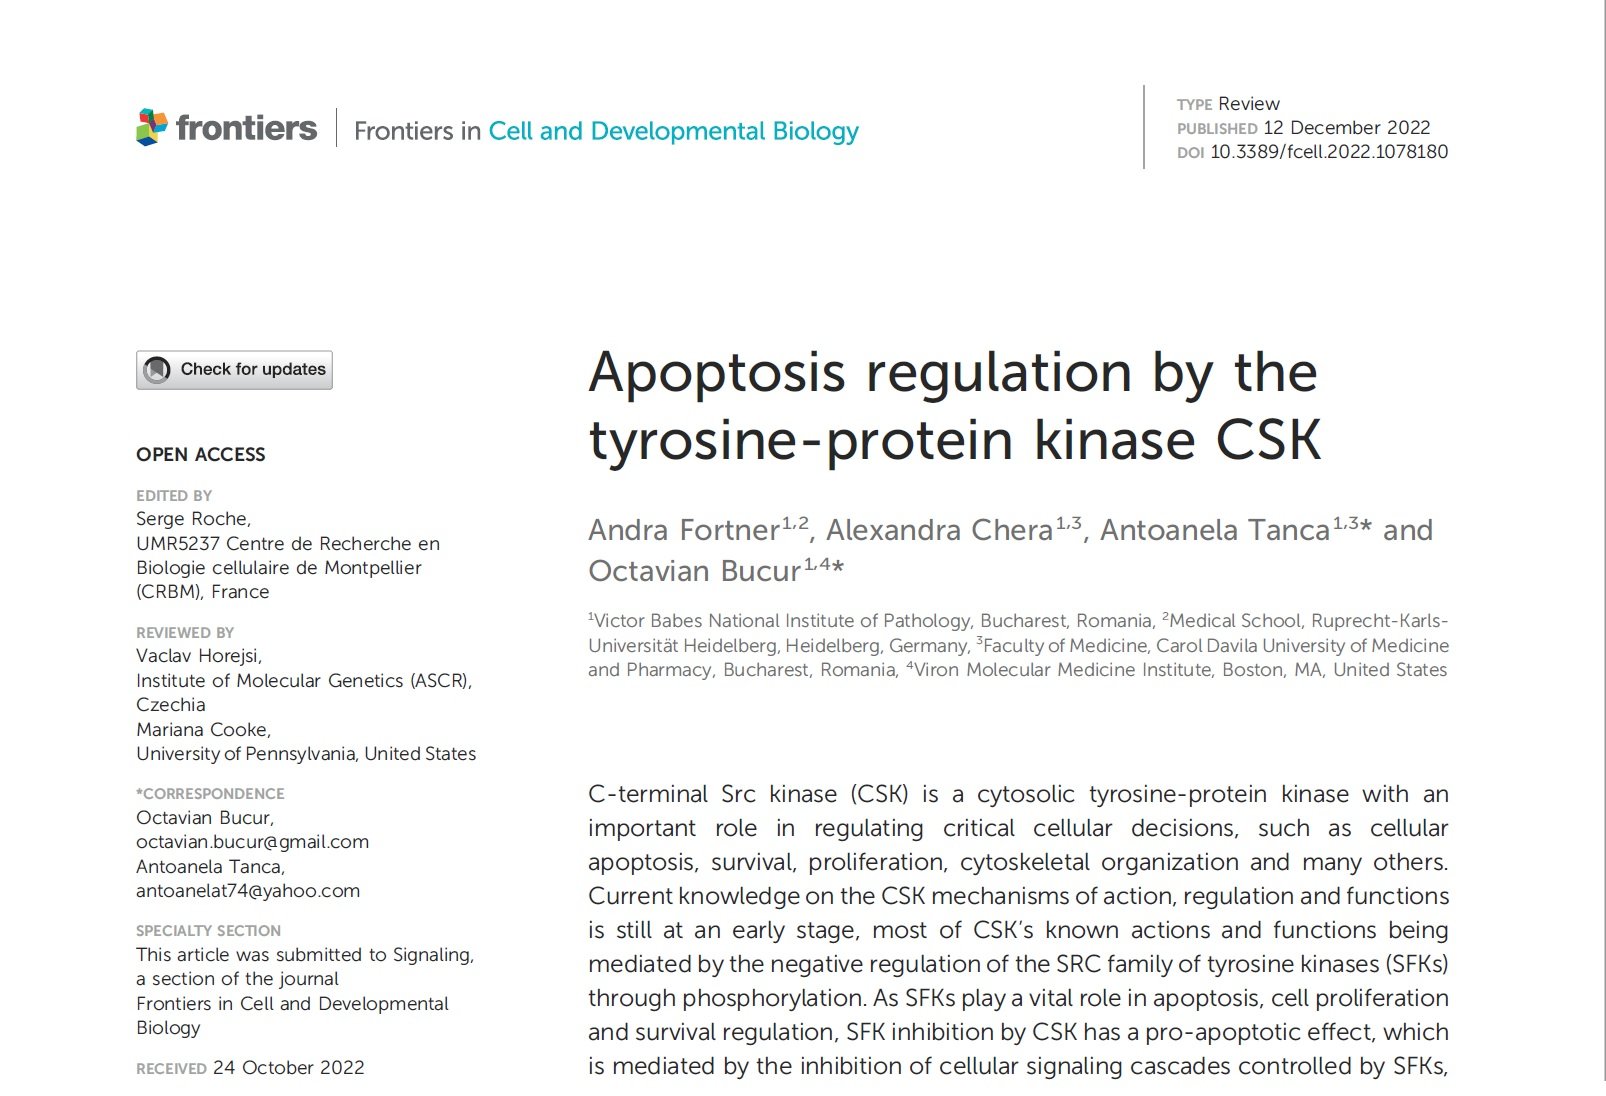 Review manuscript by Andra Fortner and Alexandra Chera is now published in Front Cell Dev Biol (IF 6)